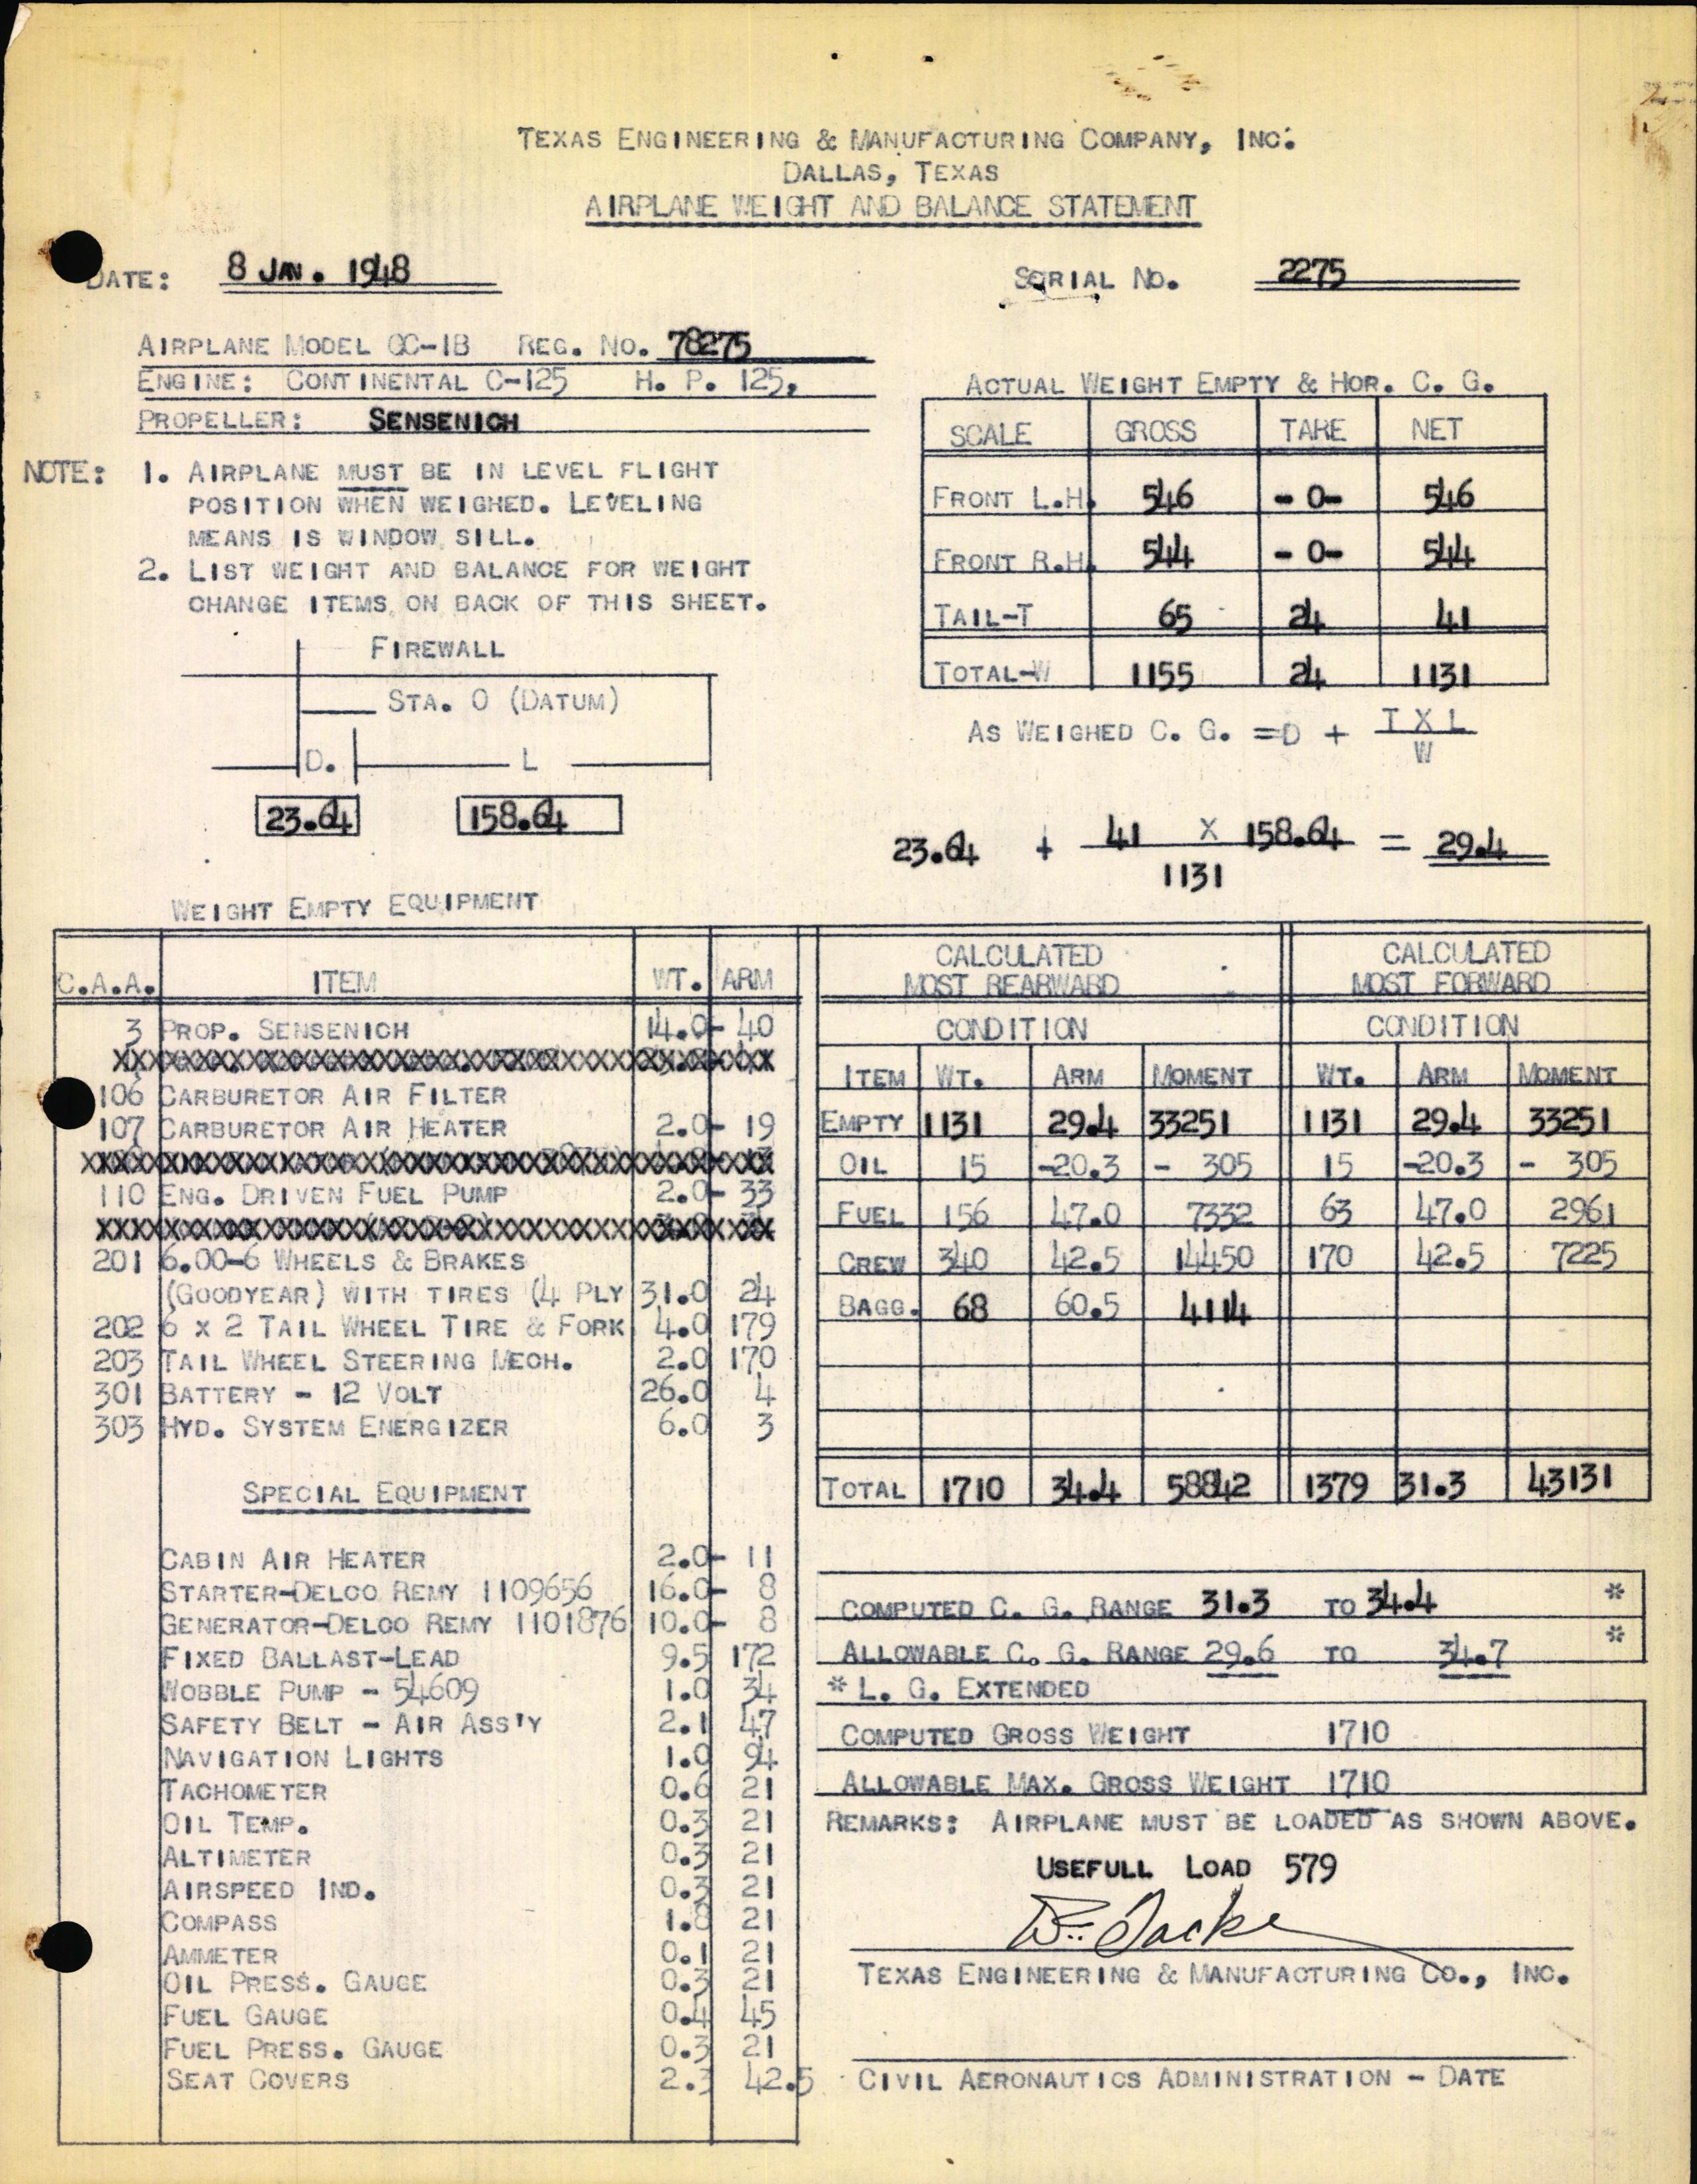 Sample page 2 from AirCorps Library document: Technical Information for Serial Number 2275